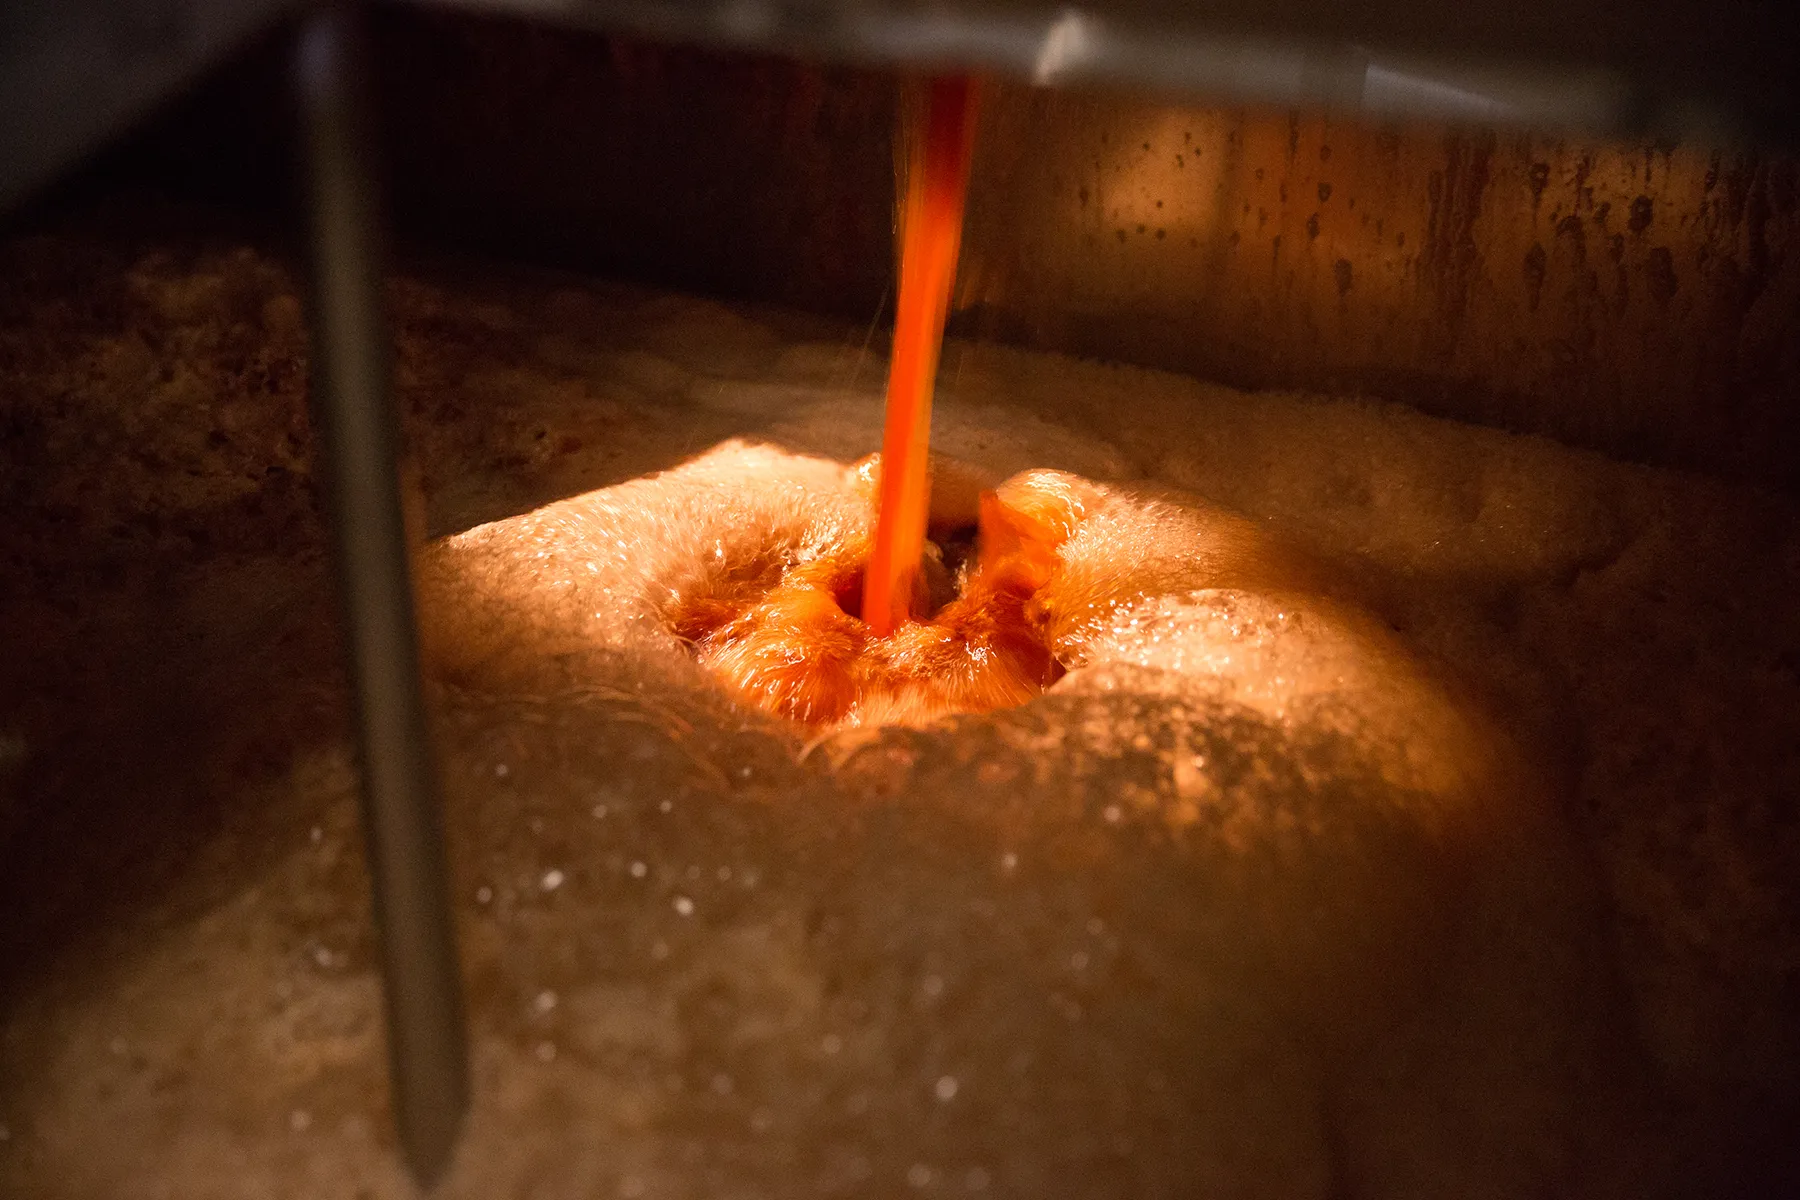 Crushing and pressing, the first flavours